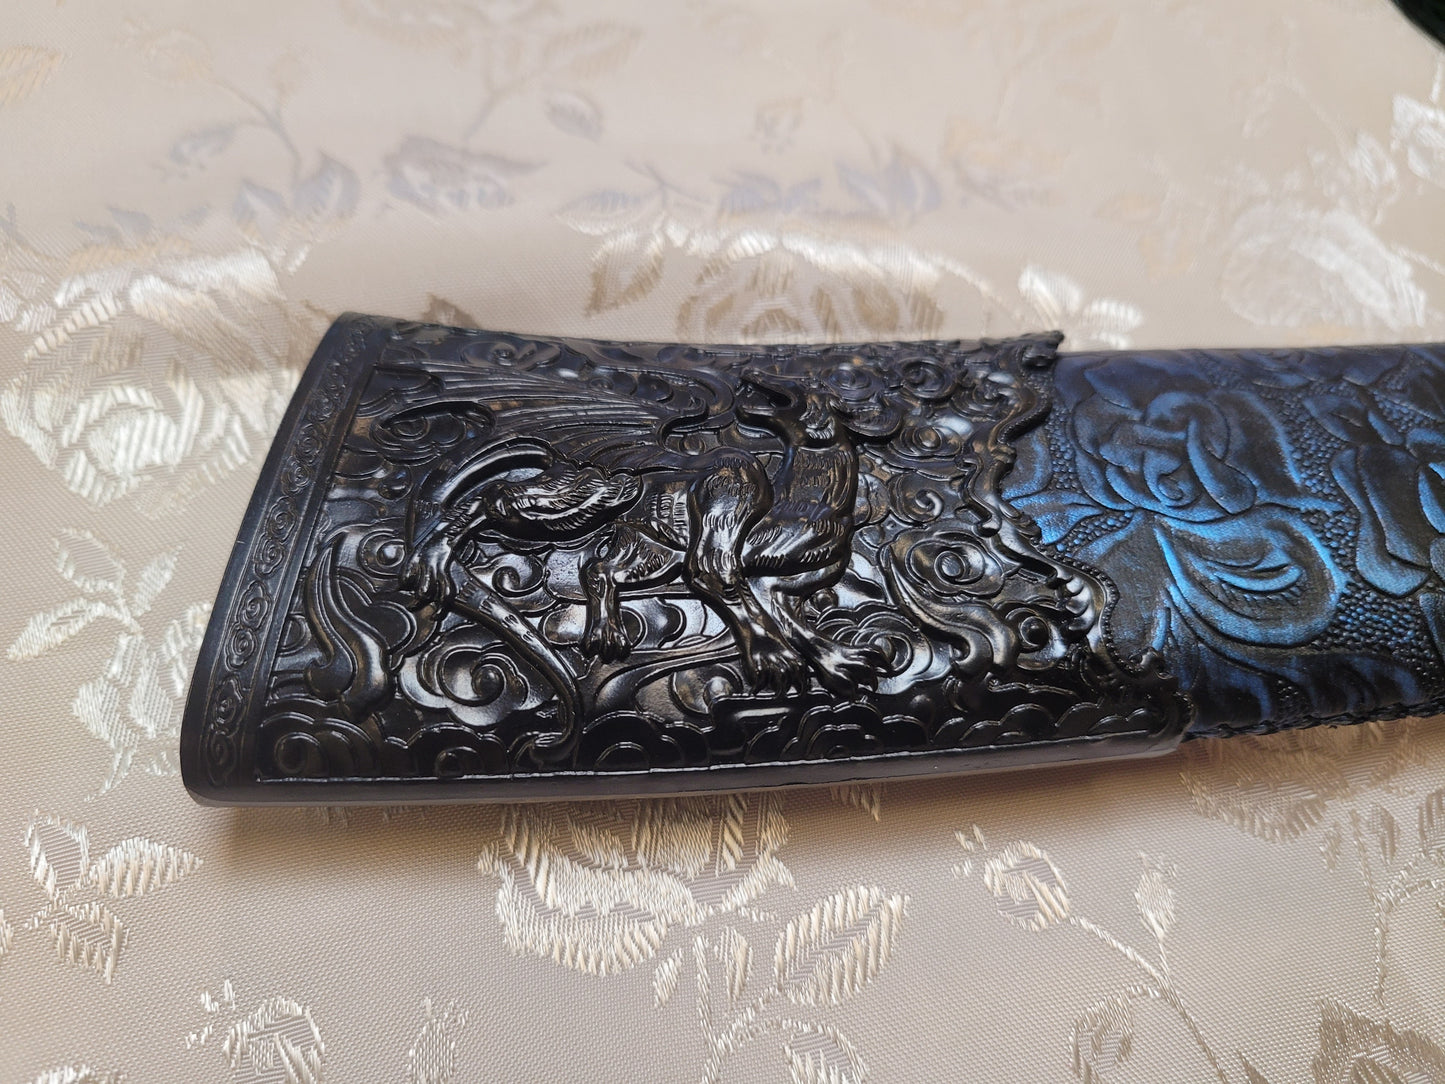 Dao Dagger - Etched Manganese Steel, Dragon and Tiger Theme